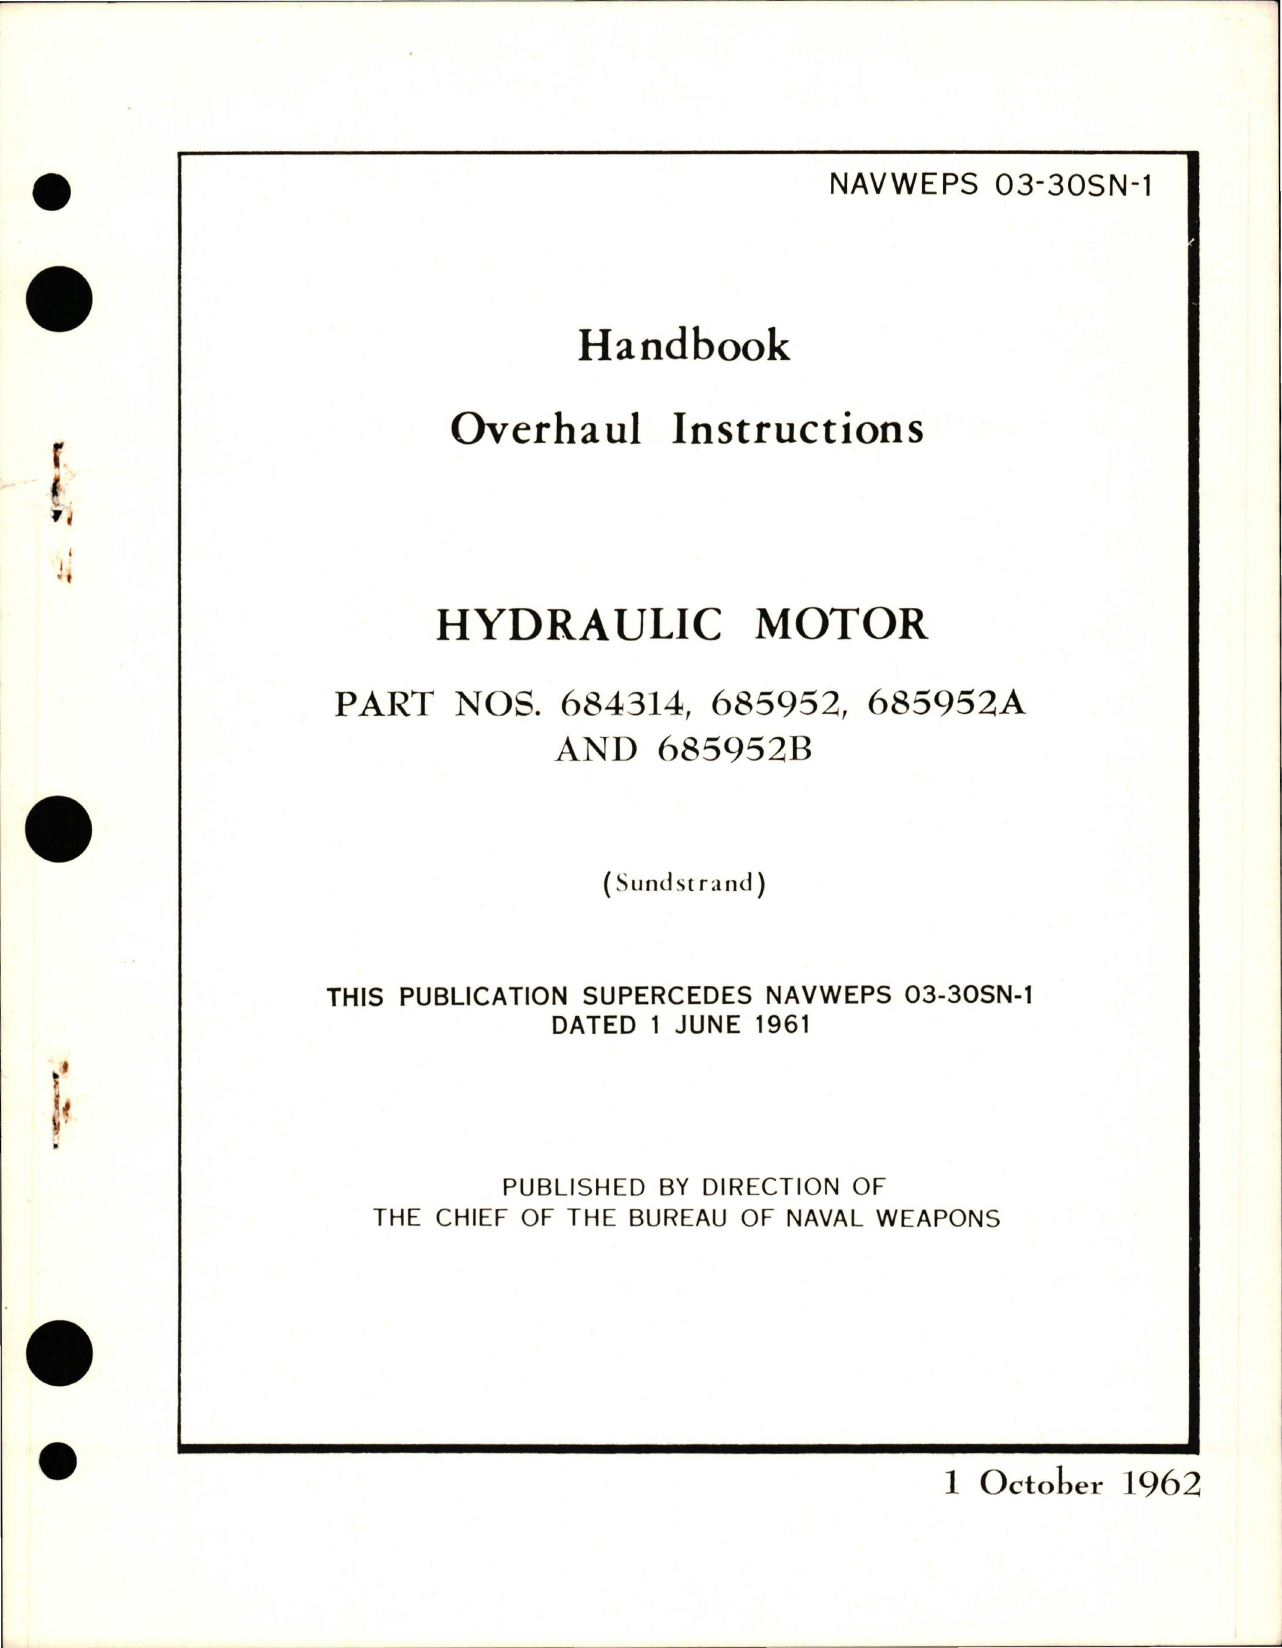 Sample page 1 from AirCorps Library document: Overhaul Instructions for Hydraulic Motor - Parts 684314, 685952, 685952A, and 685952B